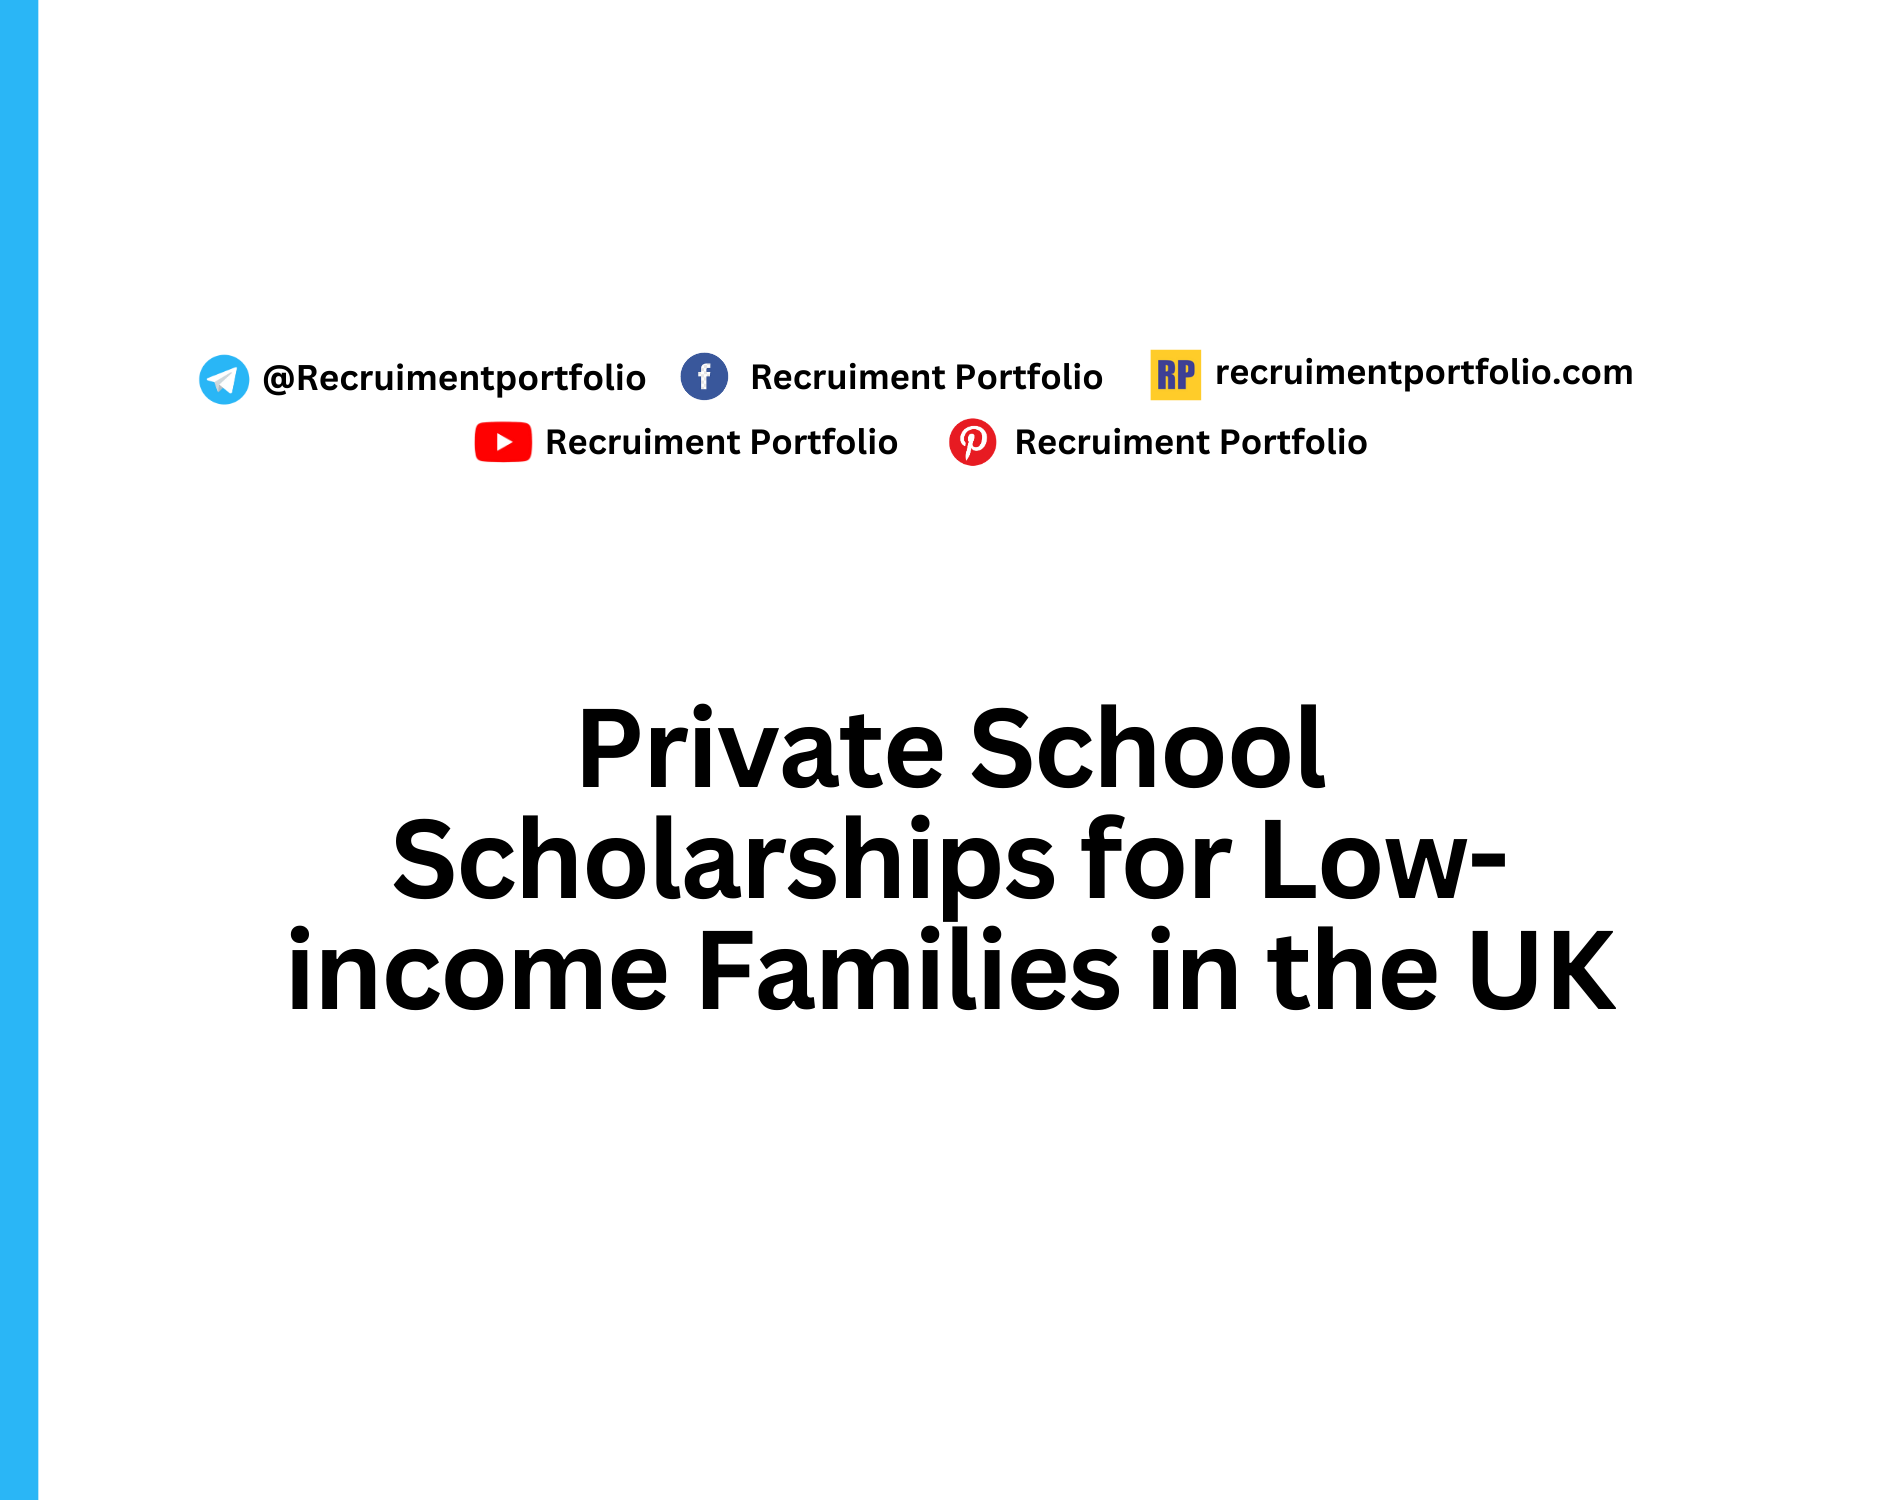 Private School Scholarships for Low-income Families in the UK